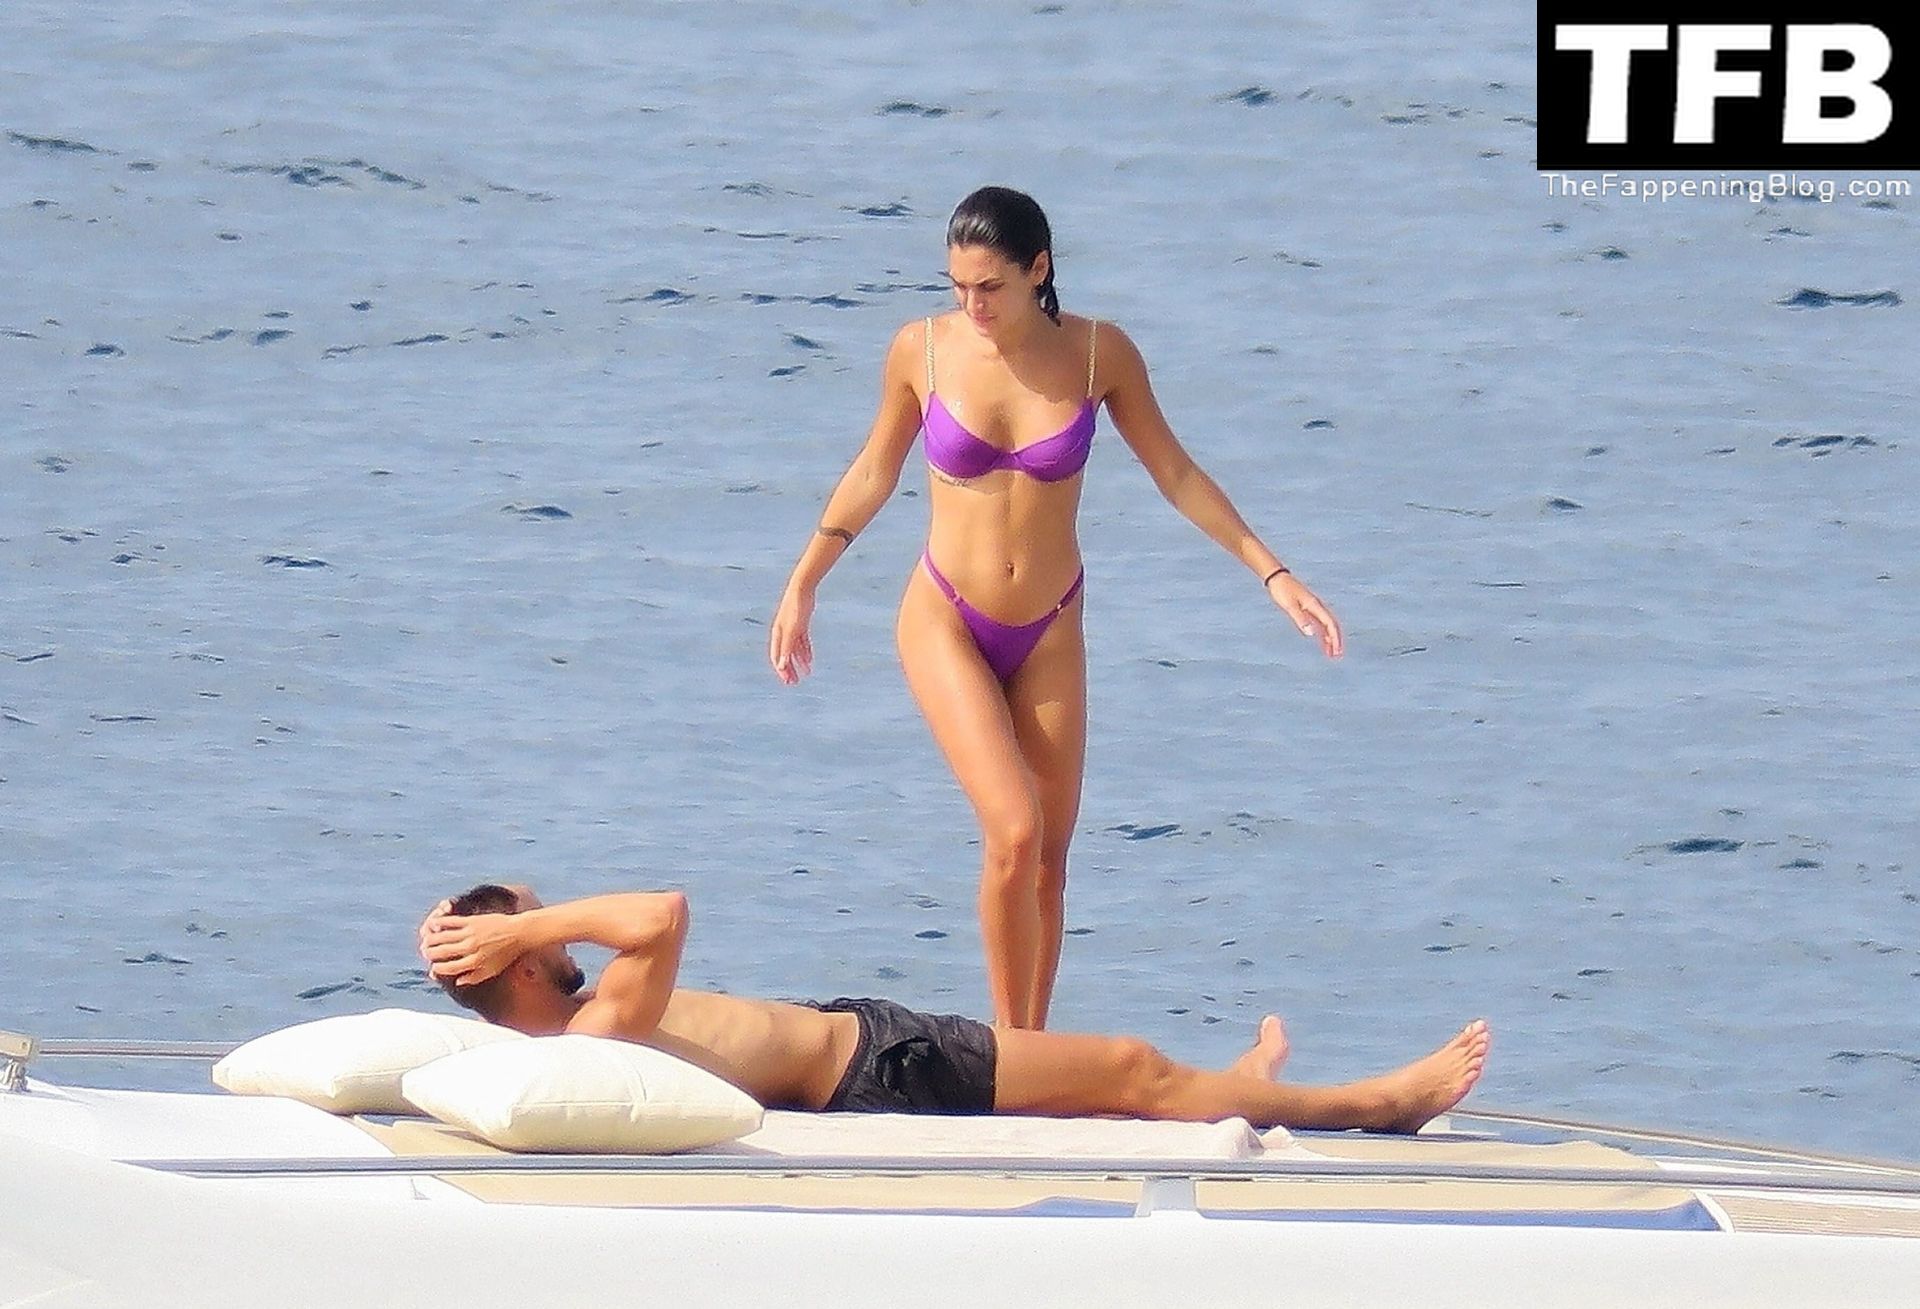 Ruben Dias Packs on the PDA with a Mysterious Scantily-Clad Woman on a Boat...